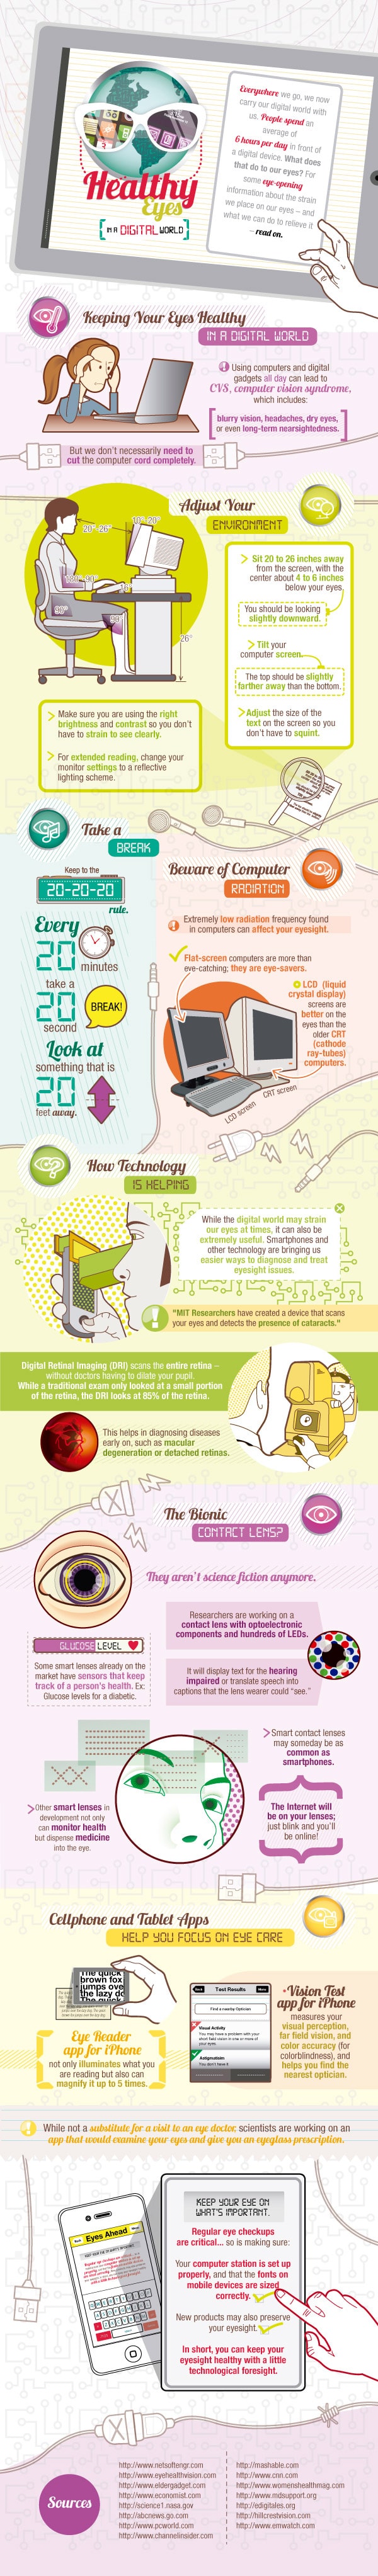 the-computer-vision-syndrome-infographic